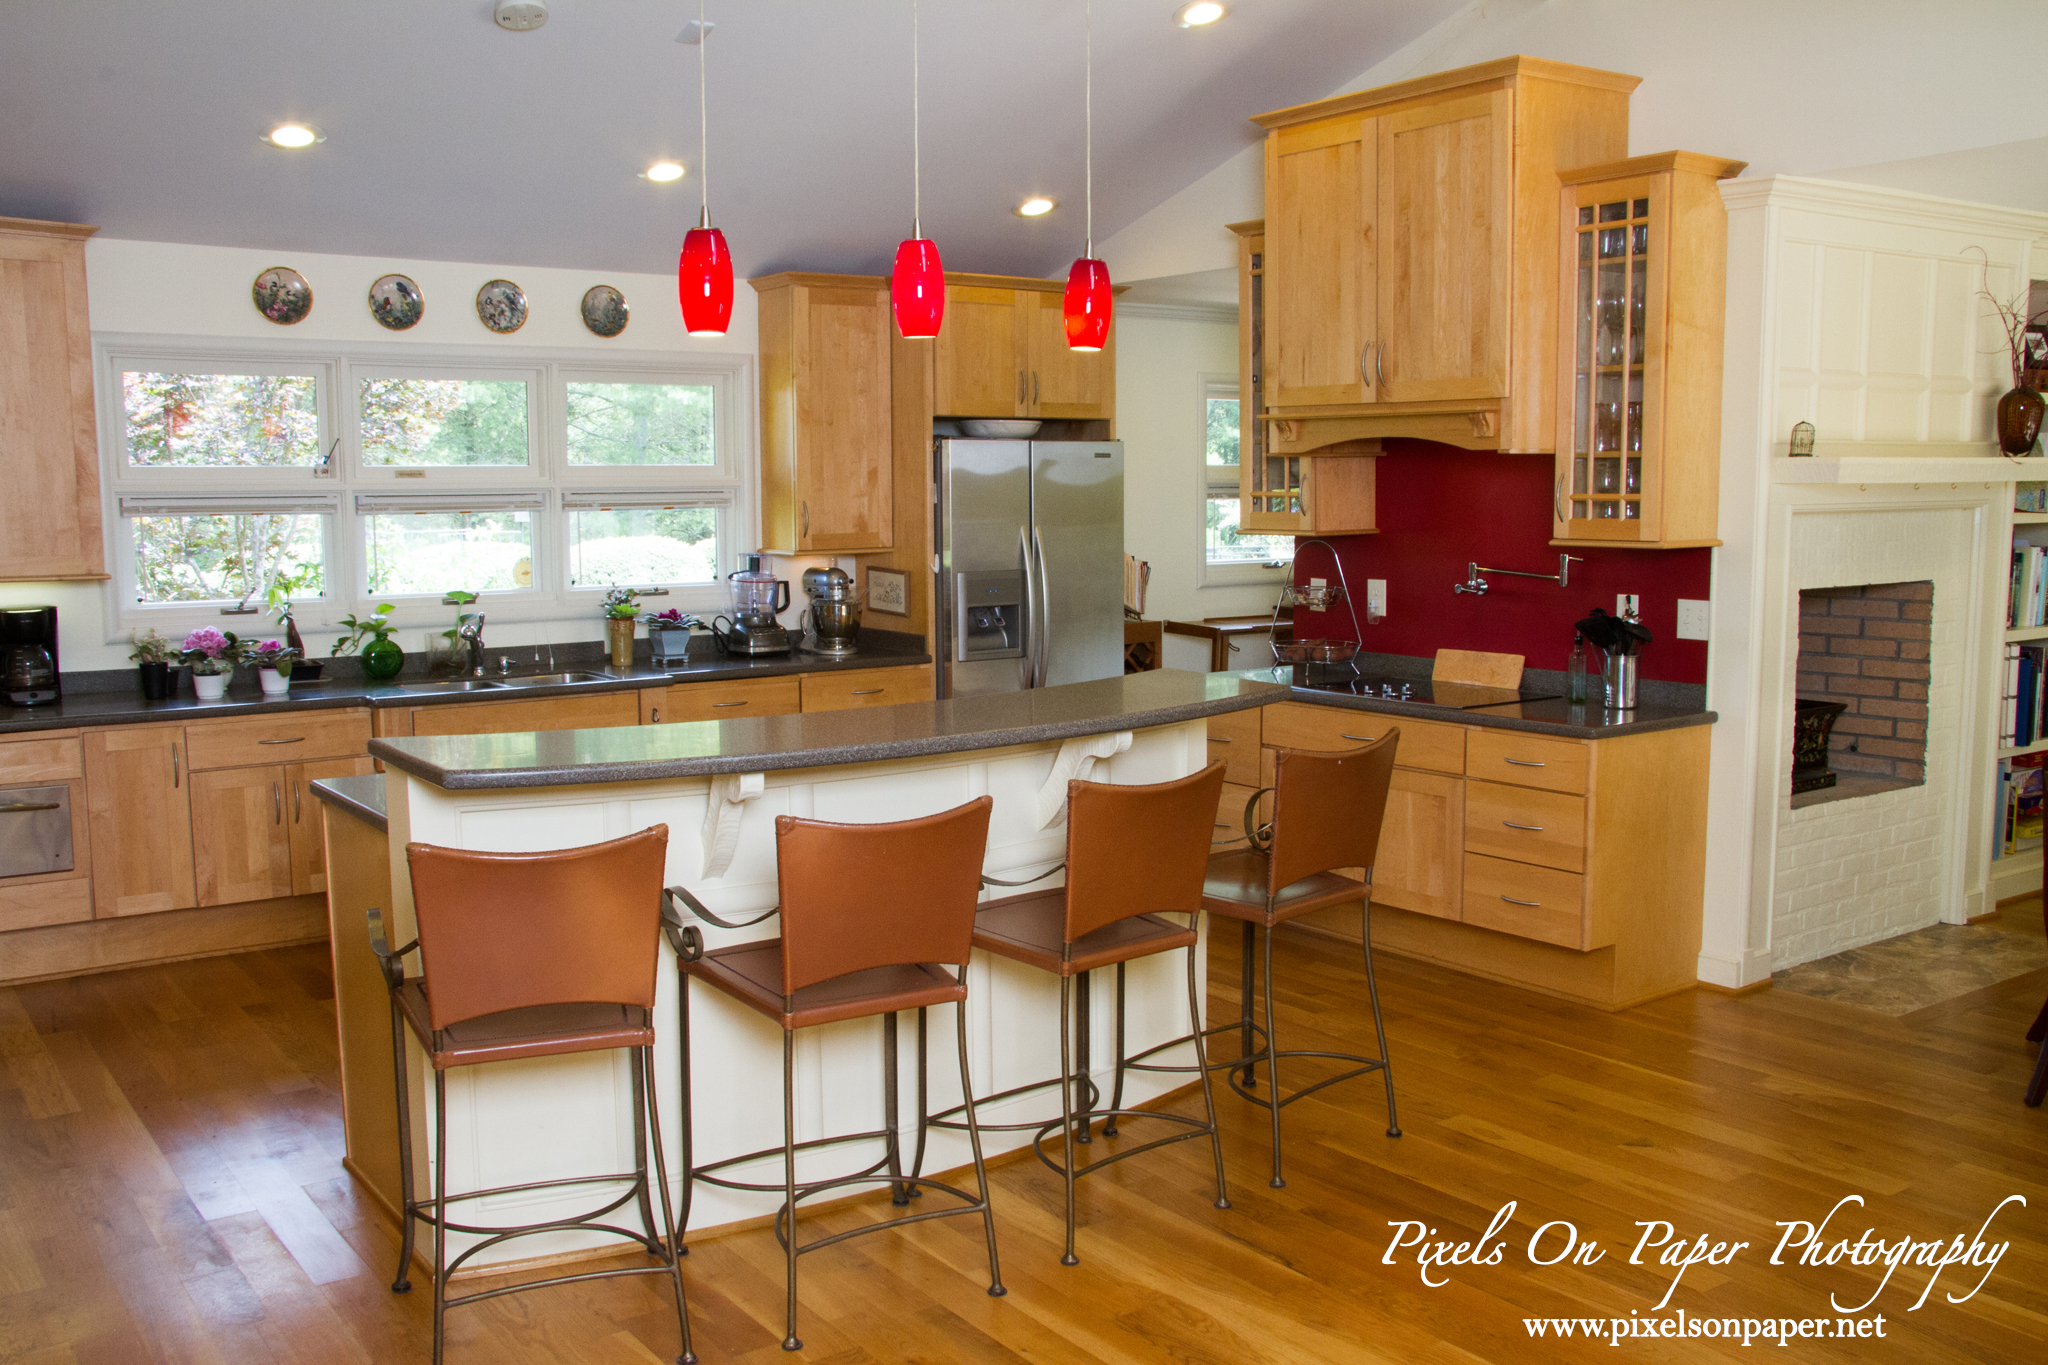 wilkesboro nc real estate photographers architectural photography photo